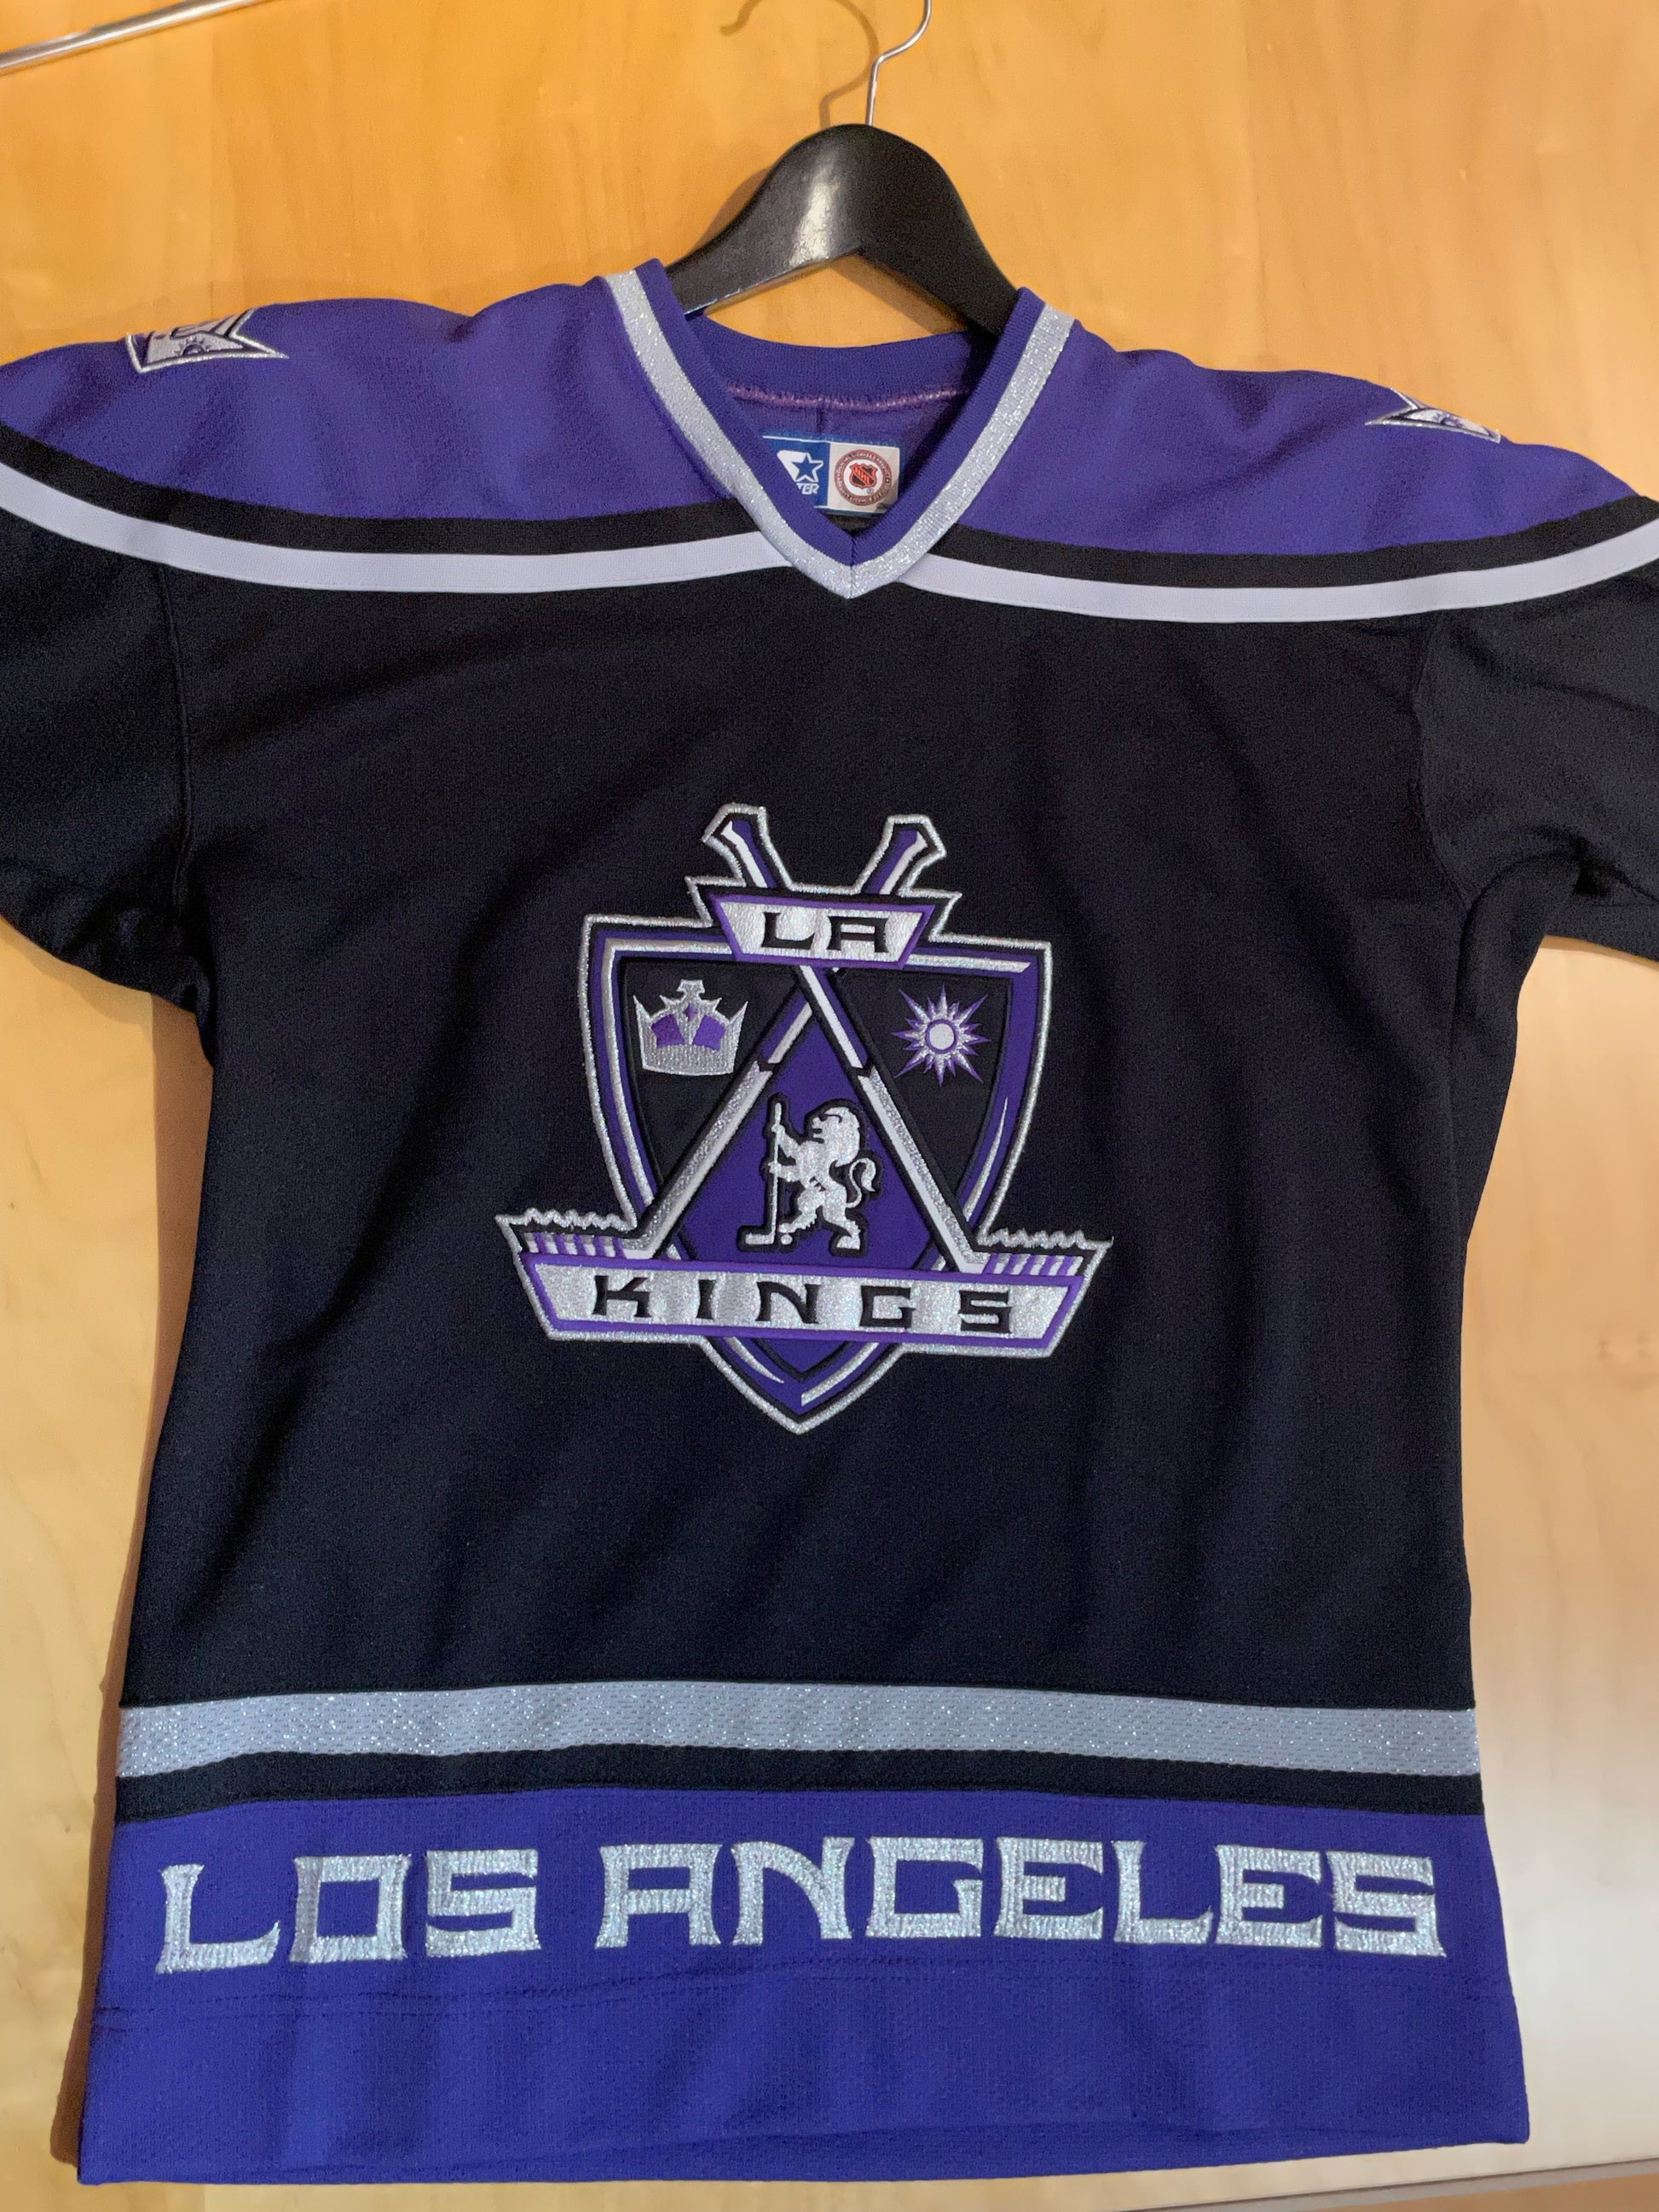 Authentic Rare Vintage Starter NHL Los Angeles Kings Hockey Jersey